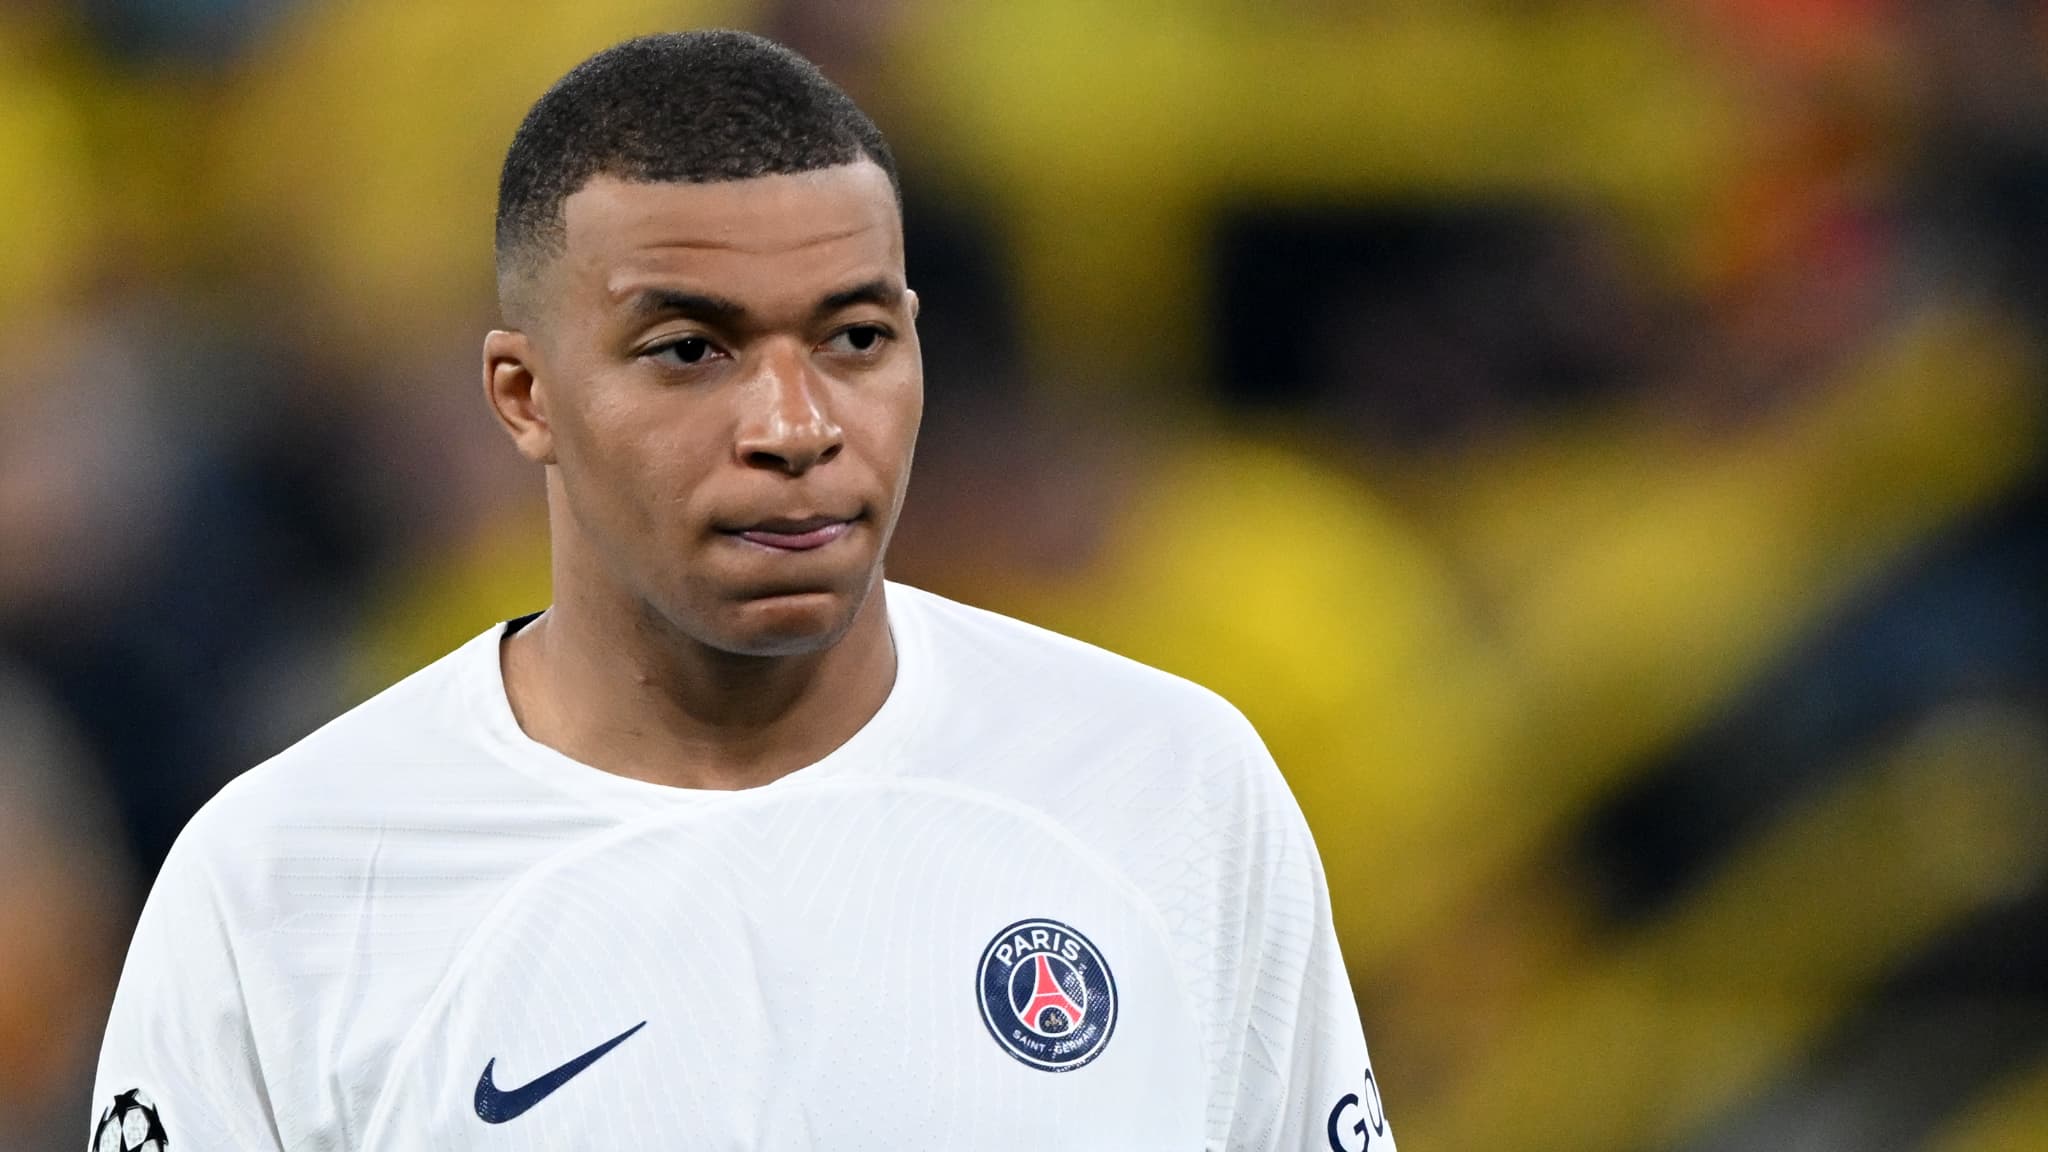 “He doesn’t do the right thing on the pitch”, are the reasons for the dissatisfaction between Mbappé and the supporters